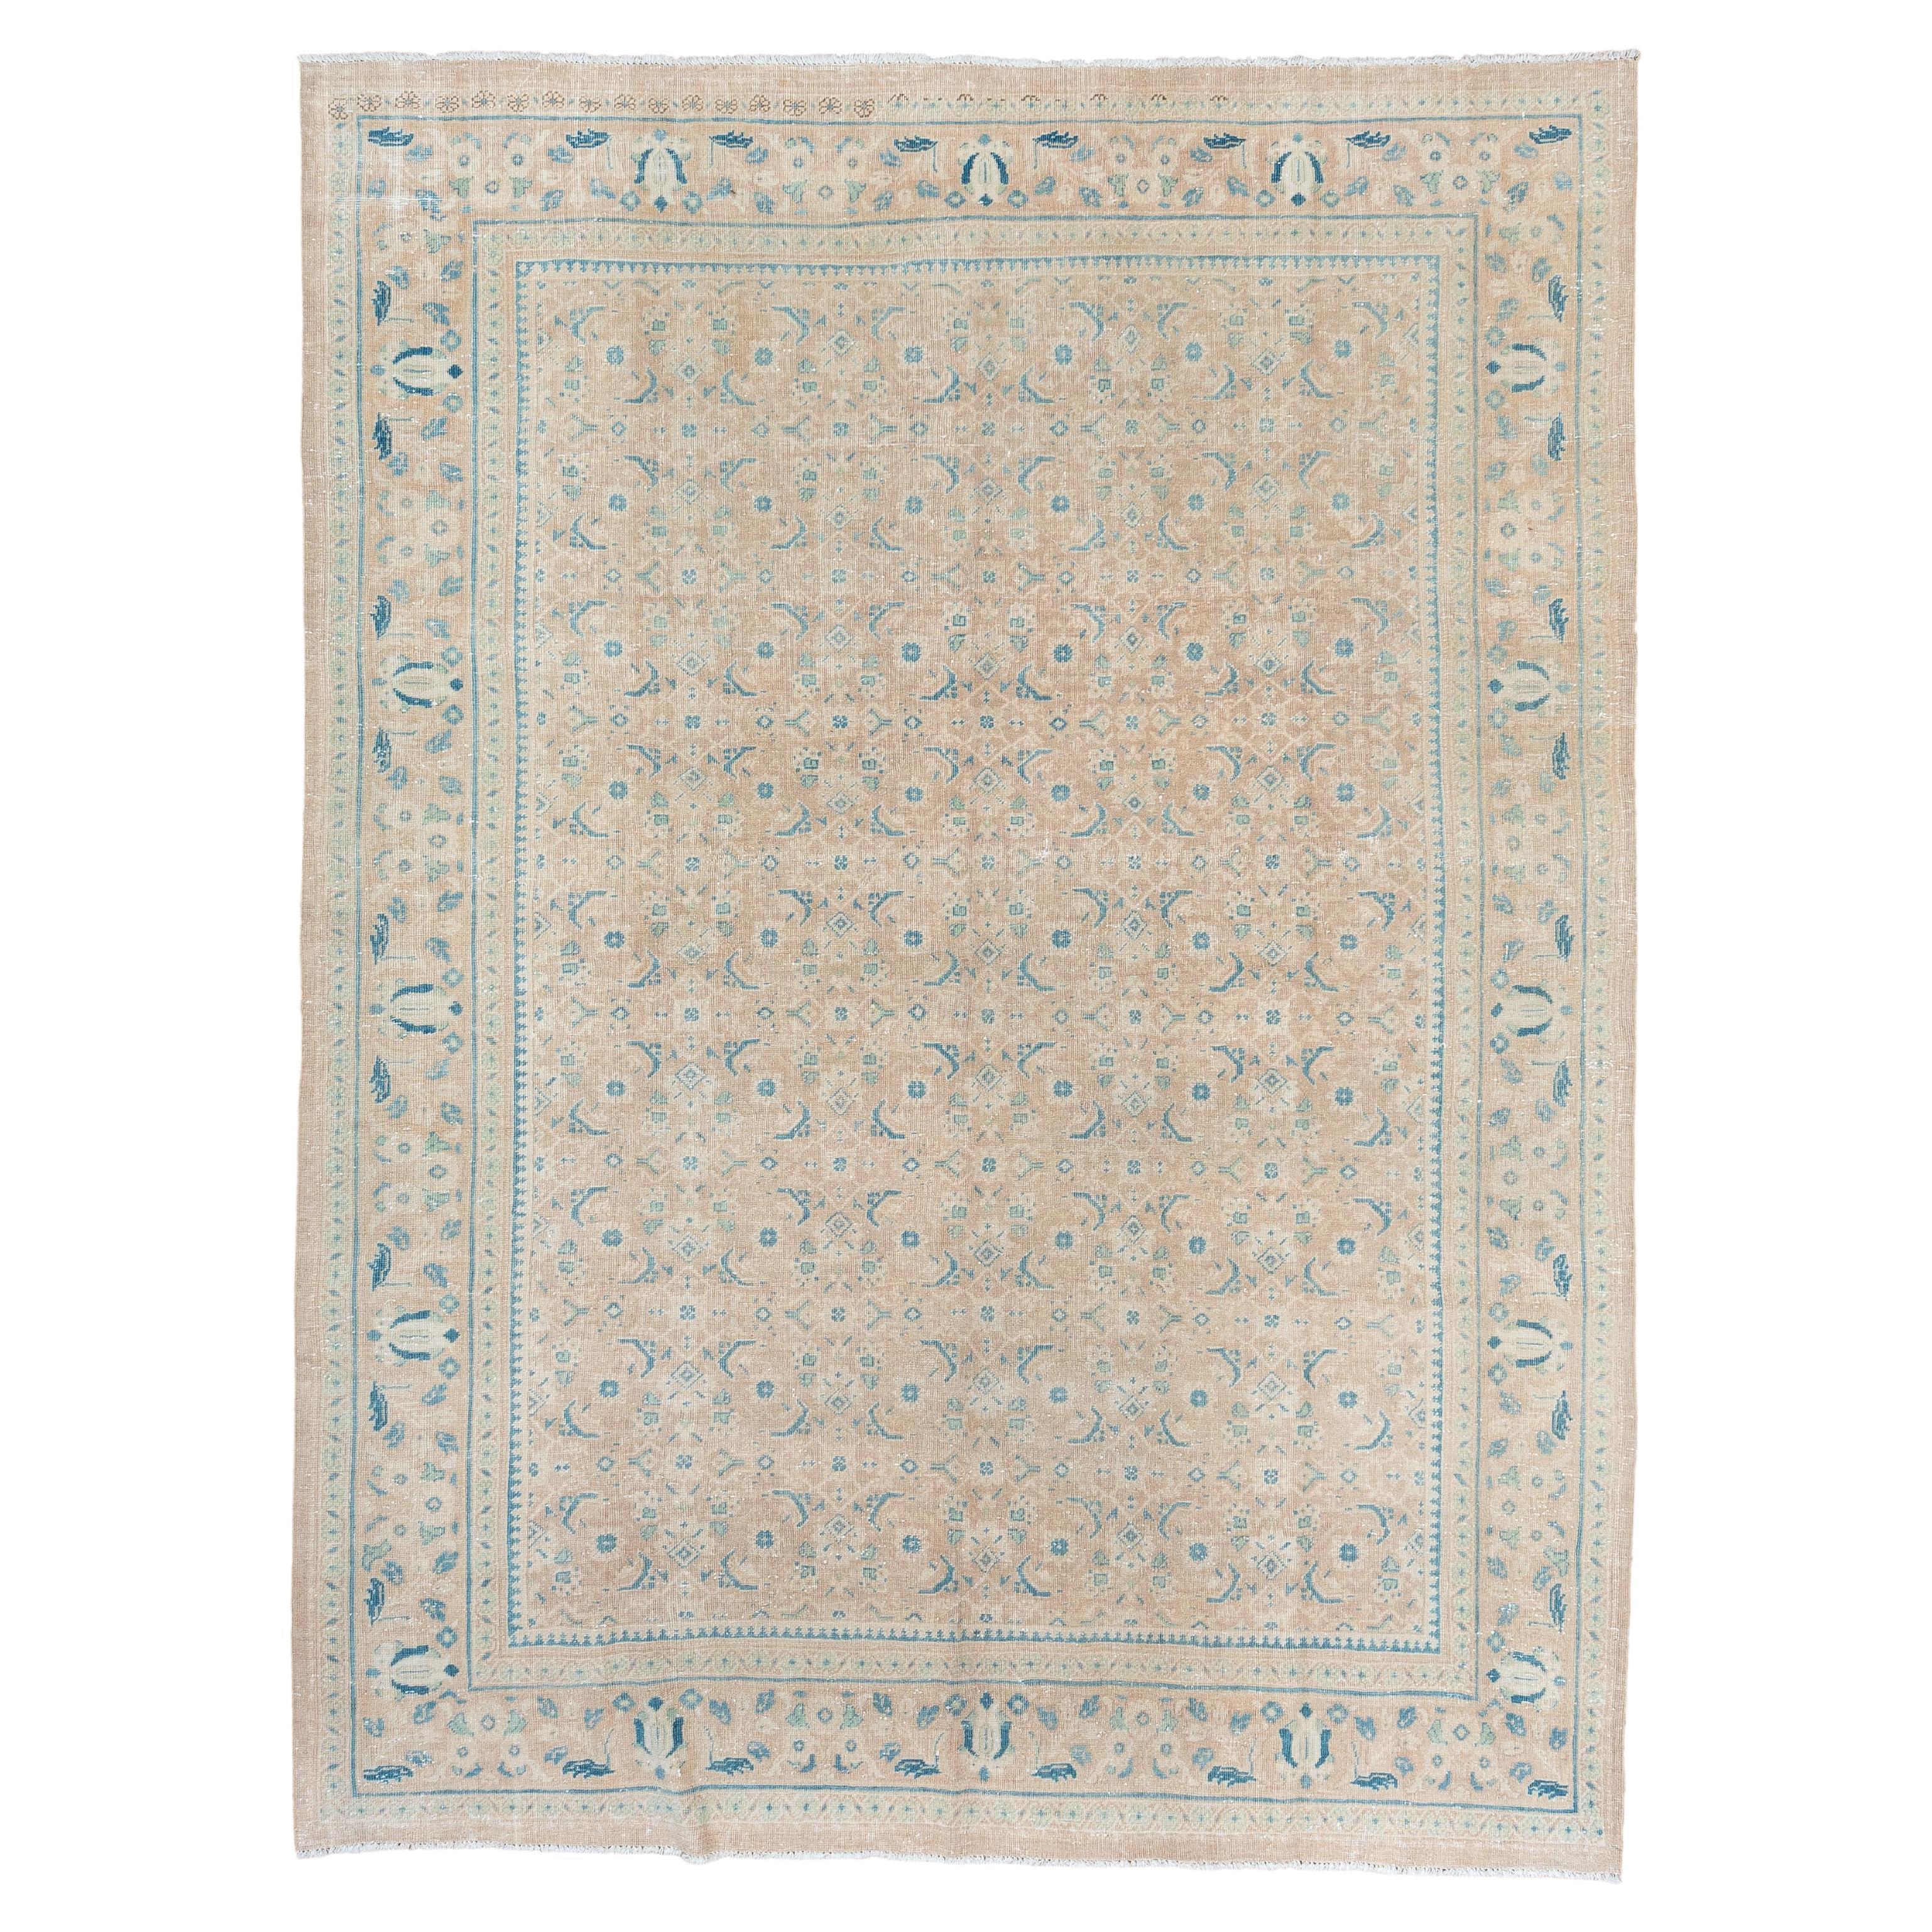 Serene Medley of Sky Blue and Cream in Persian Elegance For Sale